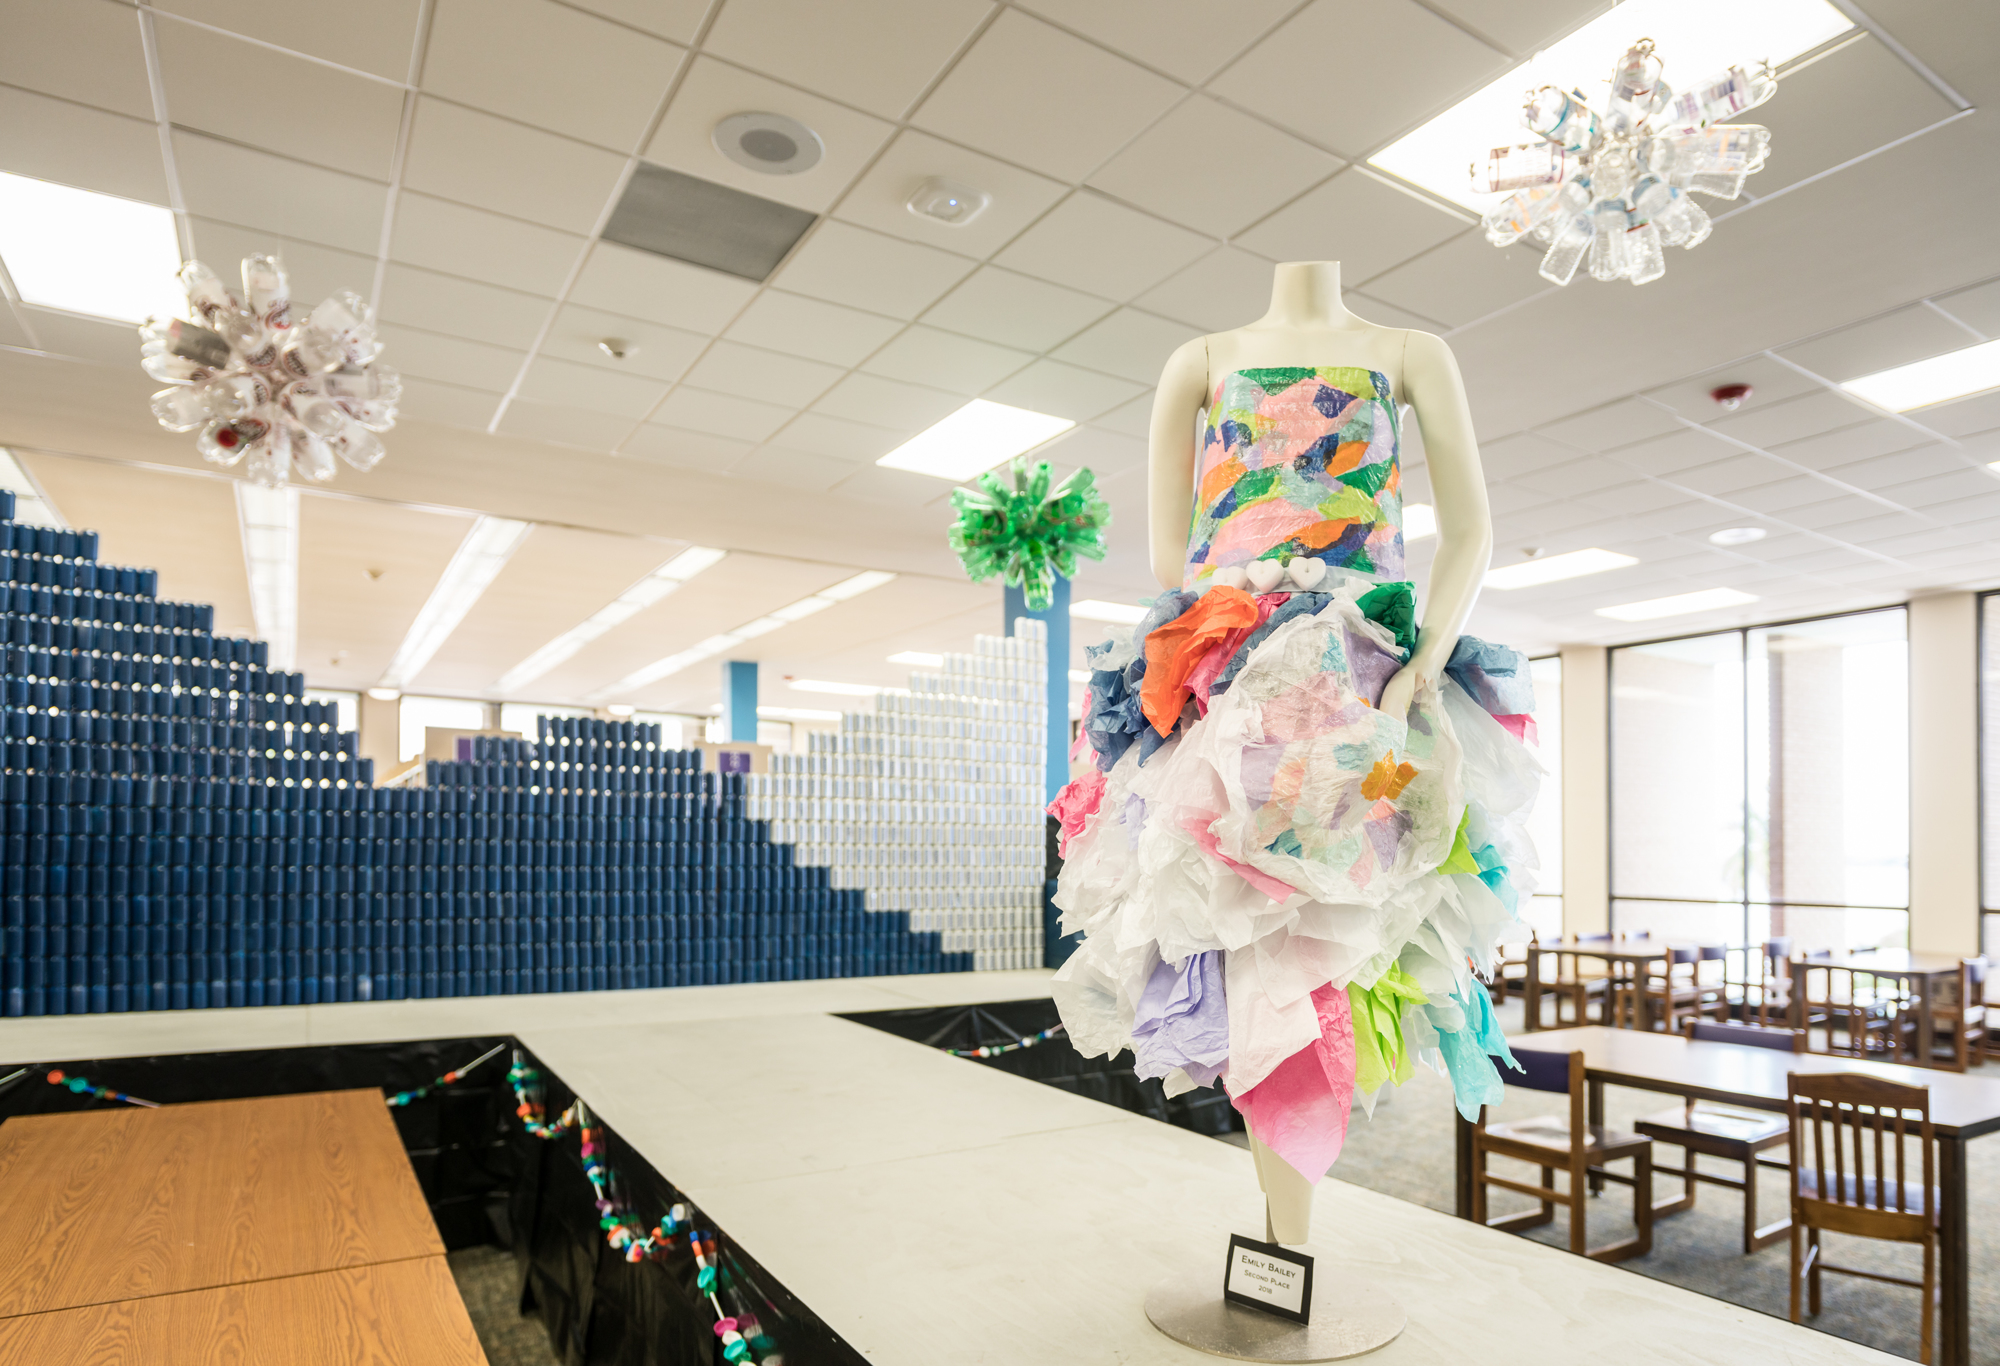 Area 52, considered a “makerspace for teens,” features sewing machines. The library hosts a yearly Recycled Dreams Fashion Show to support fashion design workshops held there.